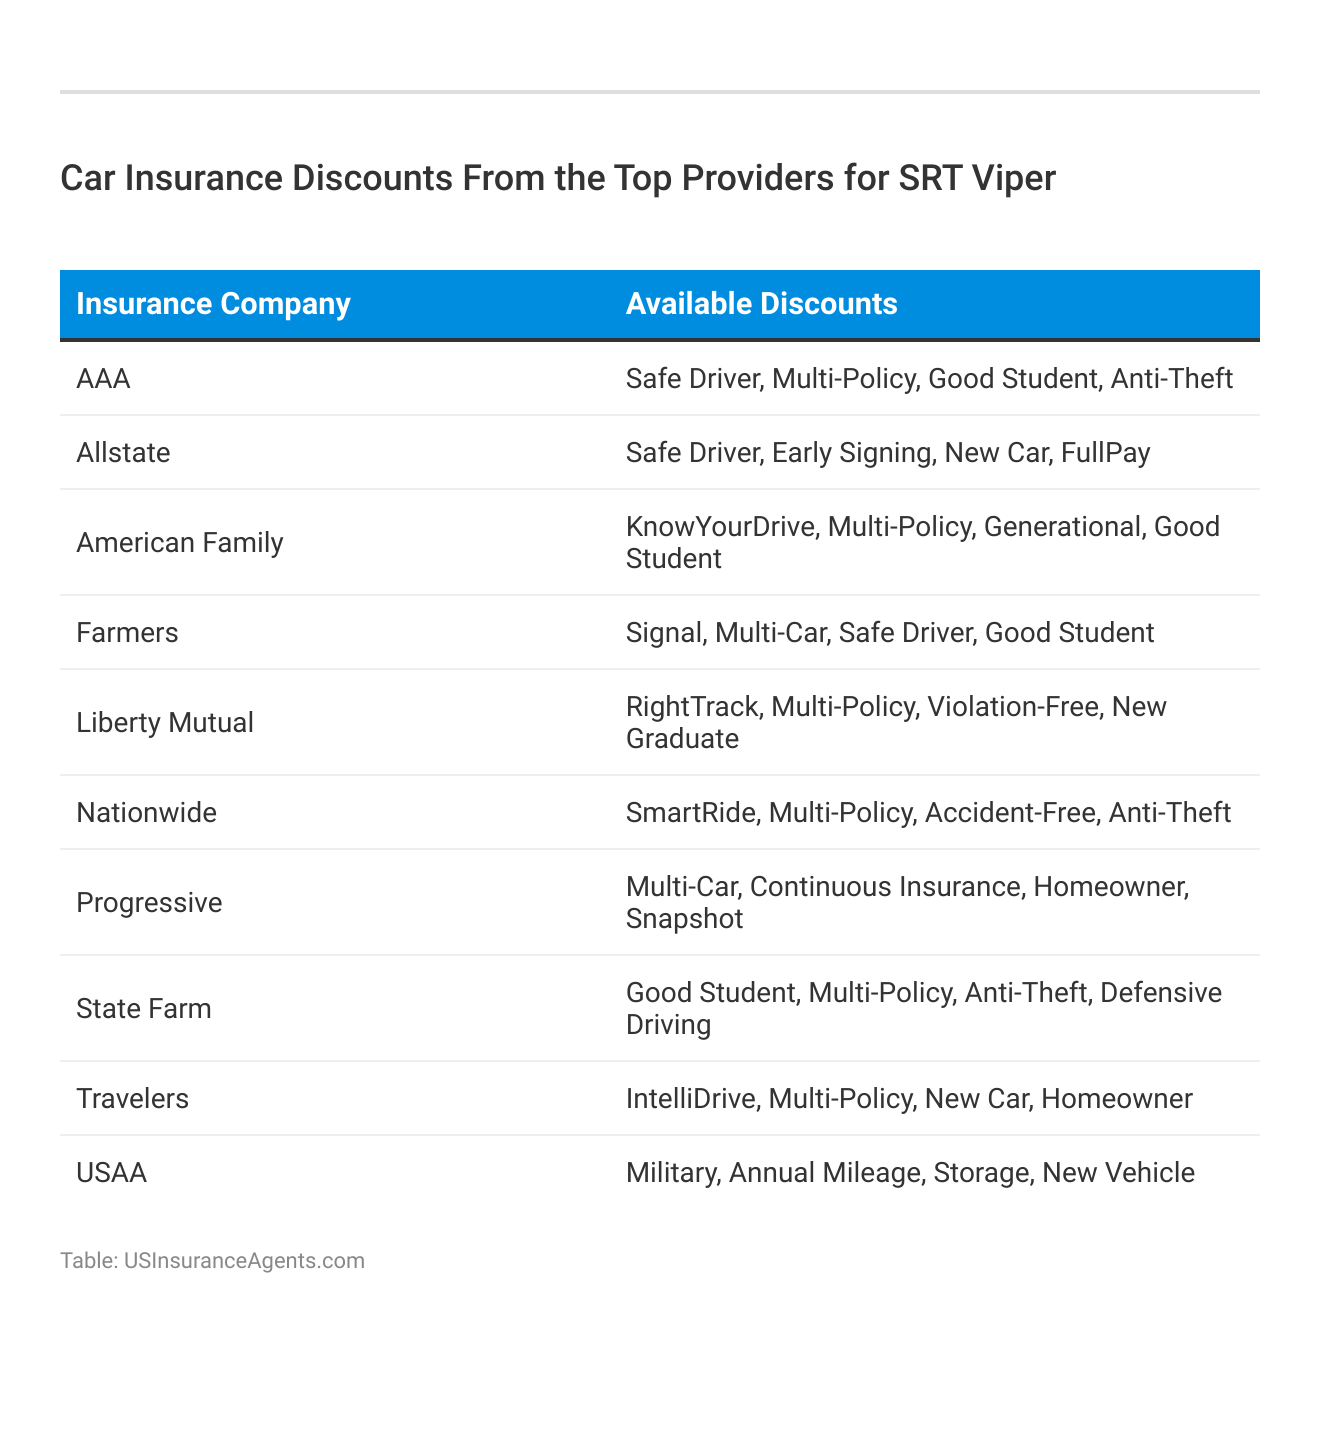 <h3>Car Insurance Discounts From the Top Providers for SRT Viper</h3>